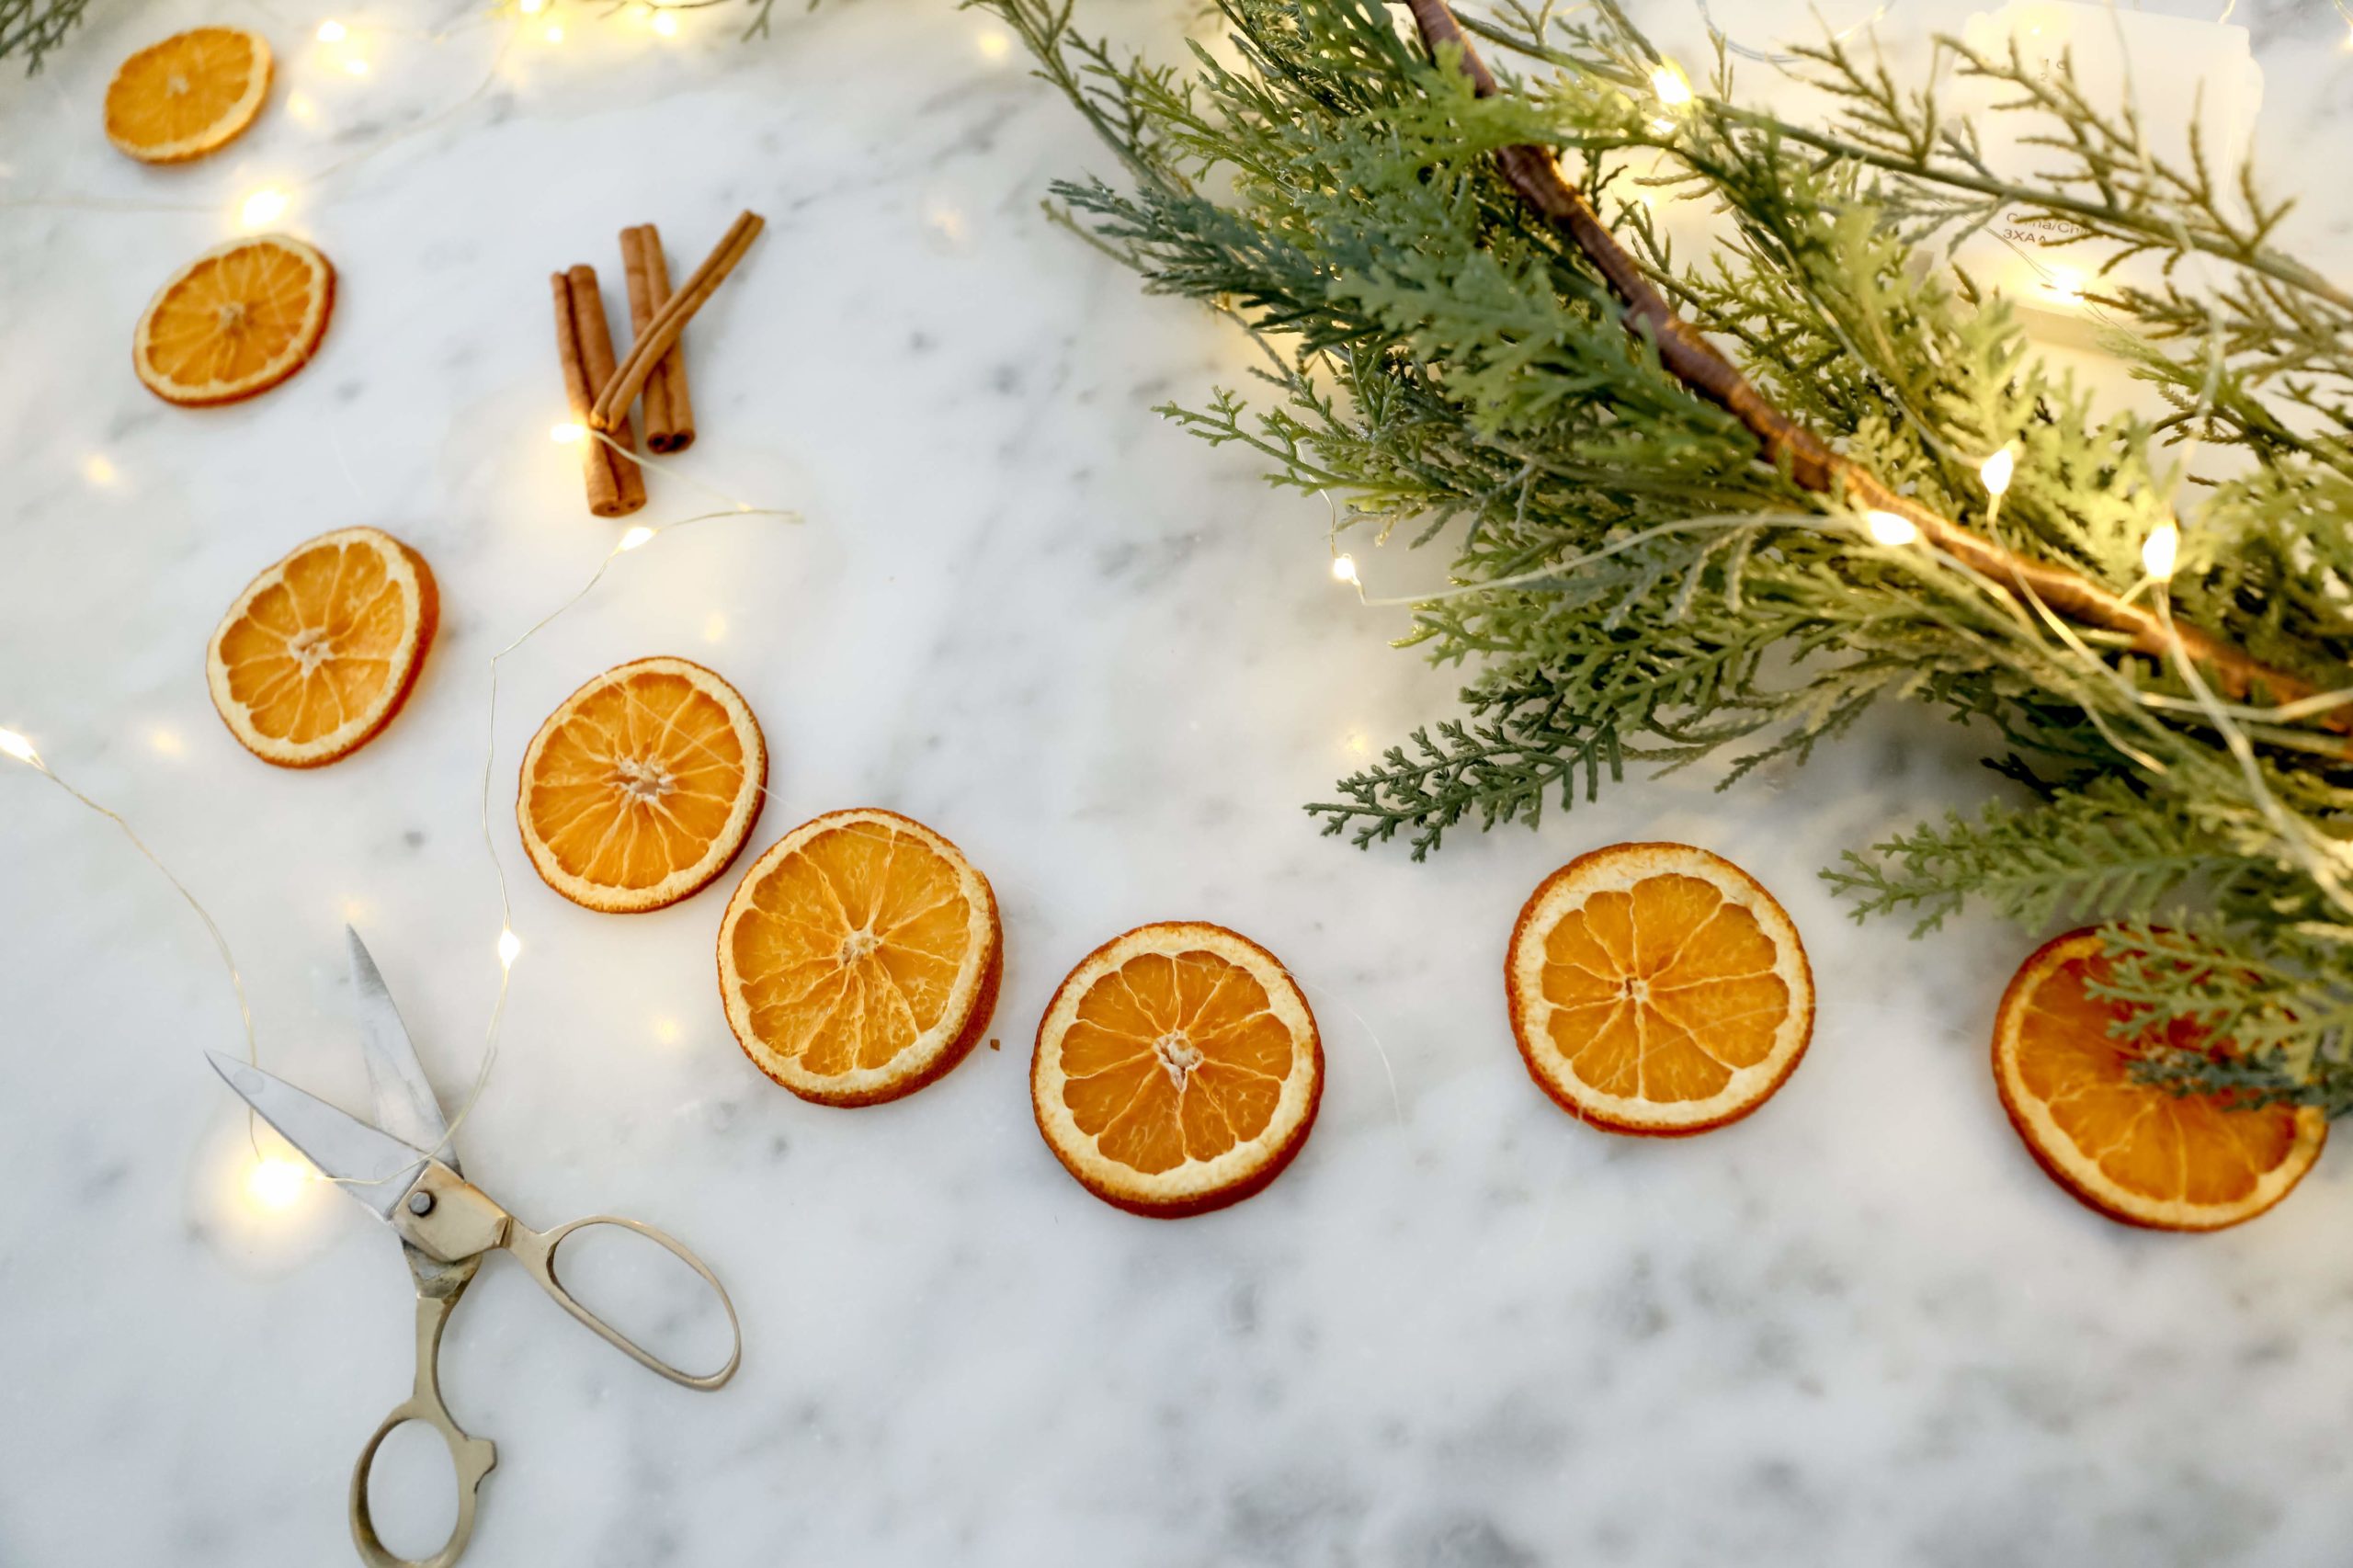 dried orange garland on a marble countertop